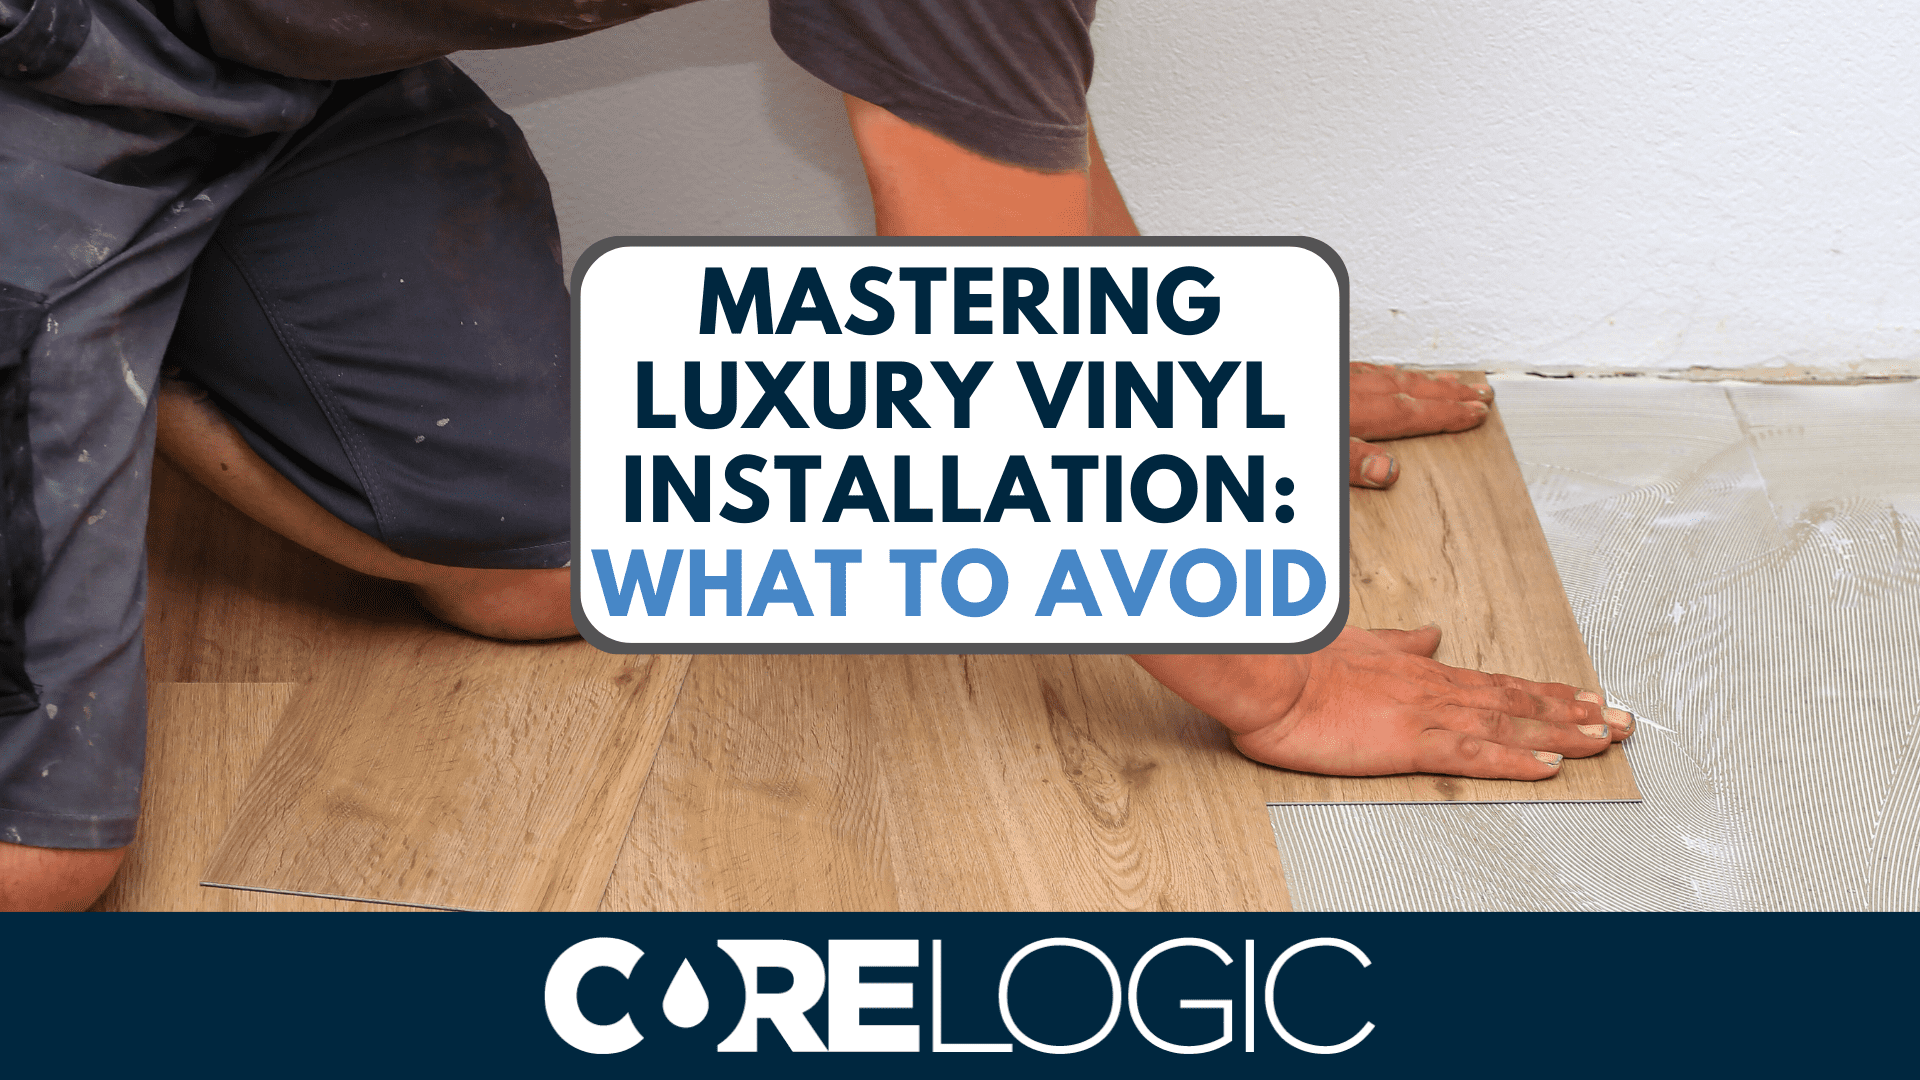 CoreLogic Choosing The Best Wear-Layer Thickness For LVP Flooring